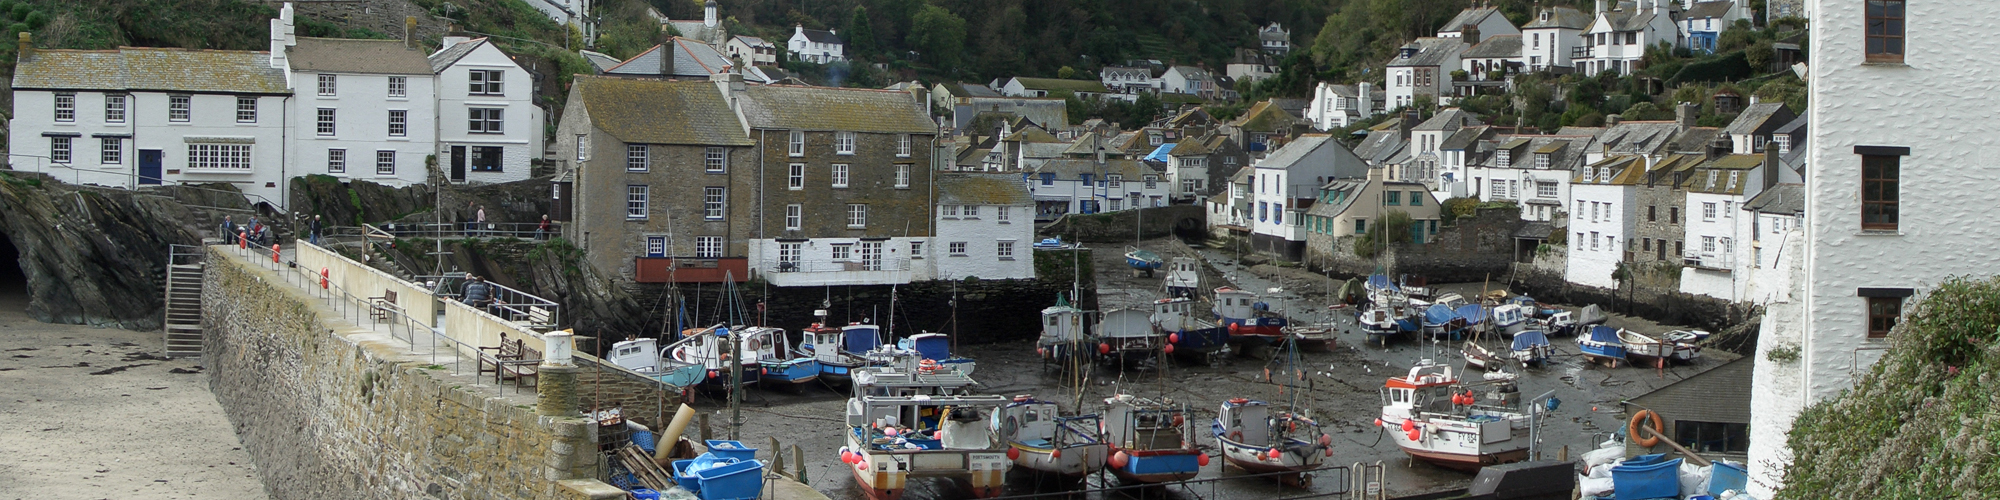 Talland House and Laity, Polperro, Cornwall